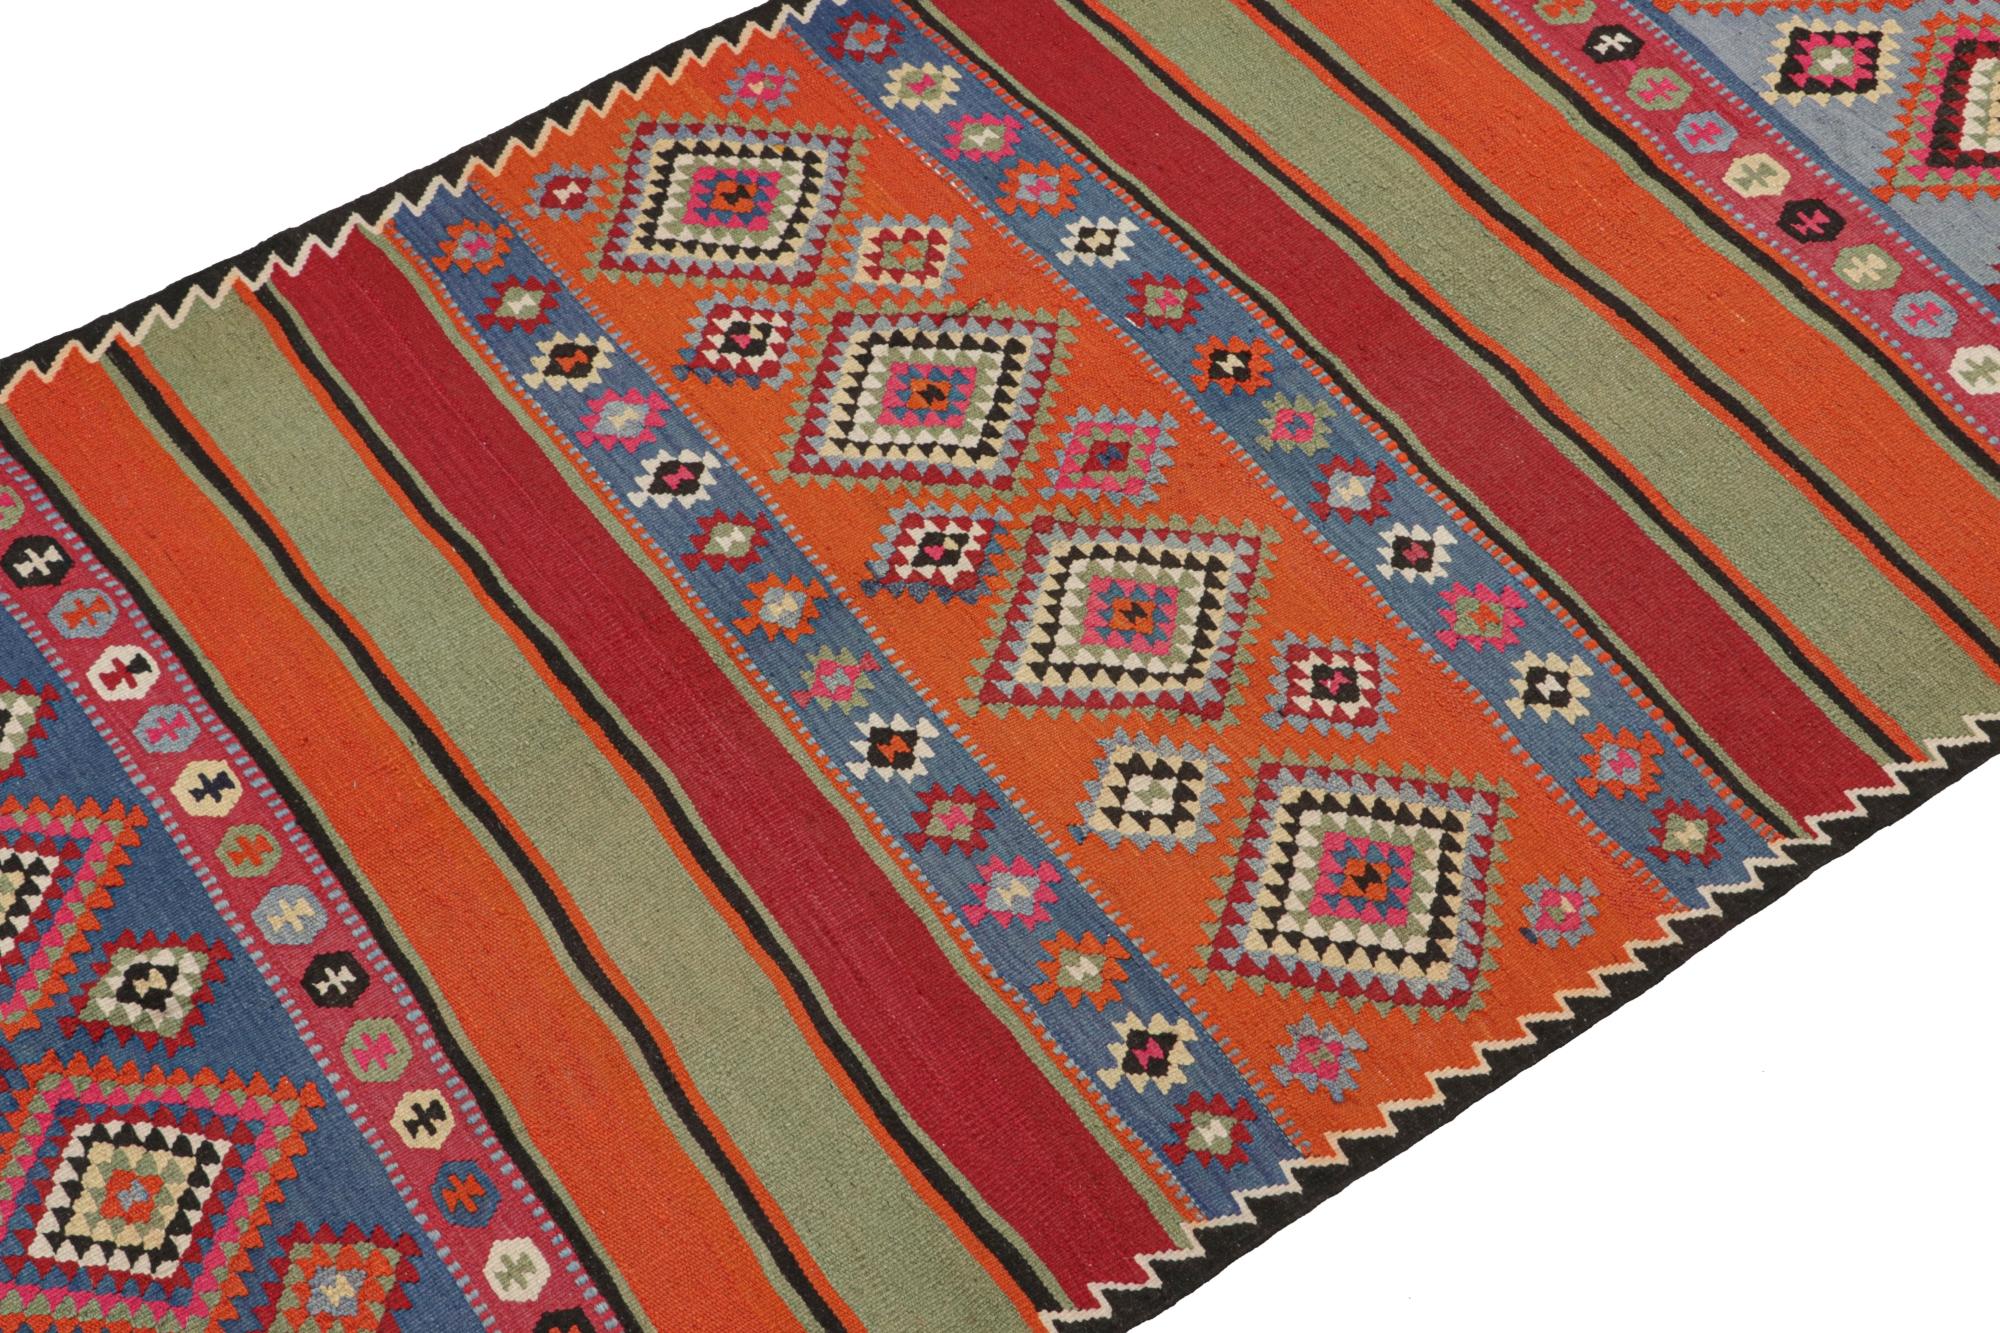 This vintage 5x13 Northwestern Persian Kilim is a tribal rug believed to hail from Zanjan. Handwoven in wool, it originates circa 1950-1960. 

Further on the Design:

Its design reads a complementary play of traditional geometric patterns &